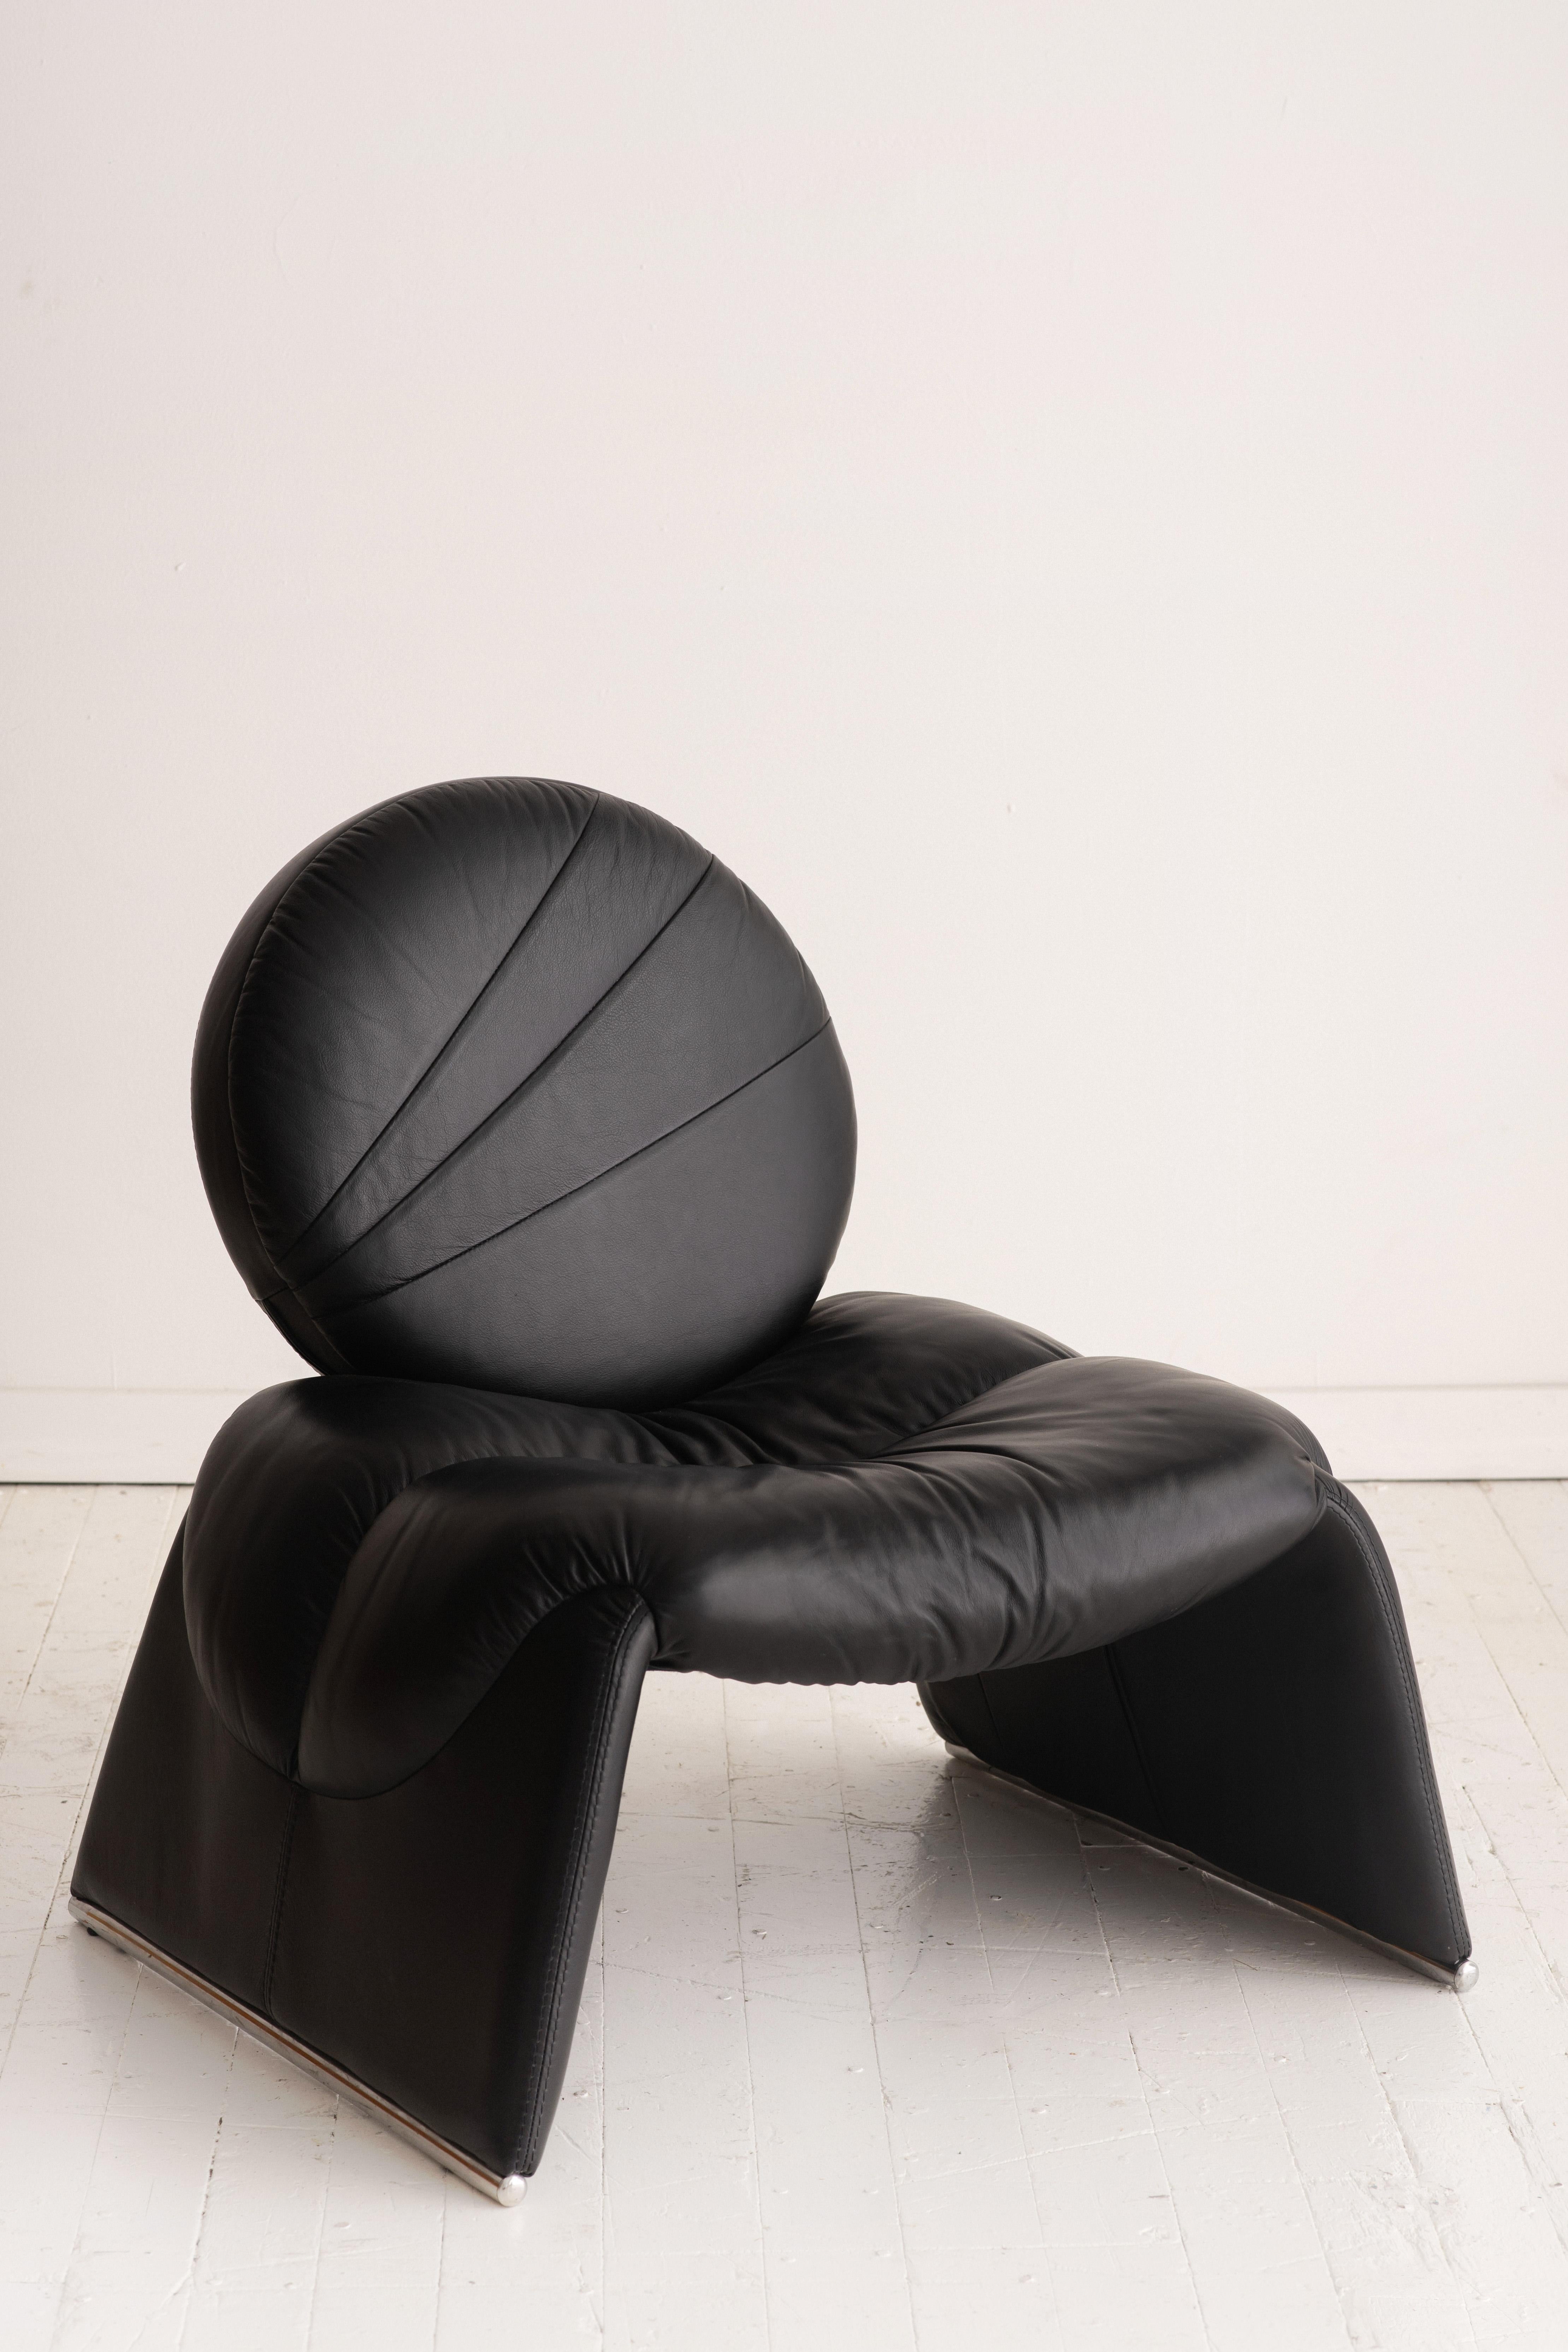 Black leather “Calypso C35” chair by Vittorio Introini. Circle back on waterfall seat and chrome feet. Soft supple leather and very comfortable! Made in Italy.